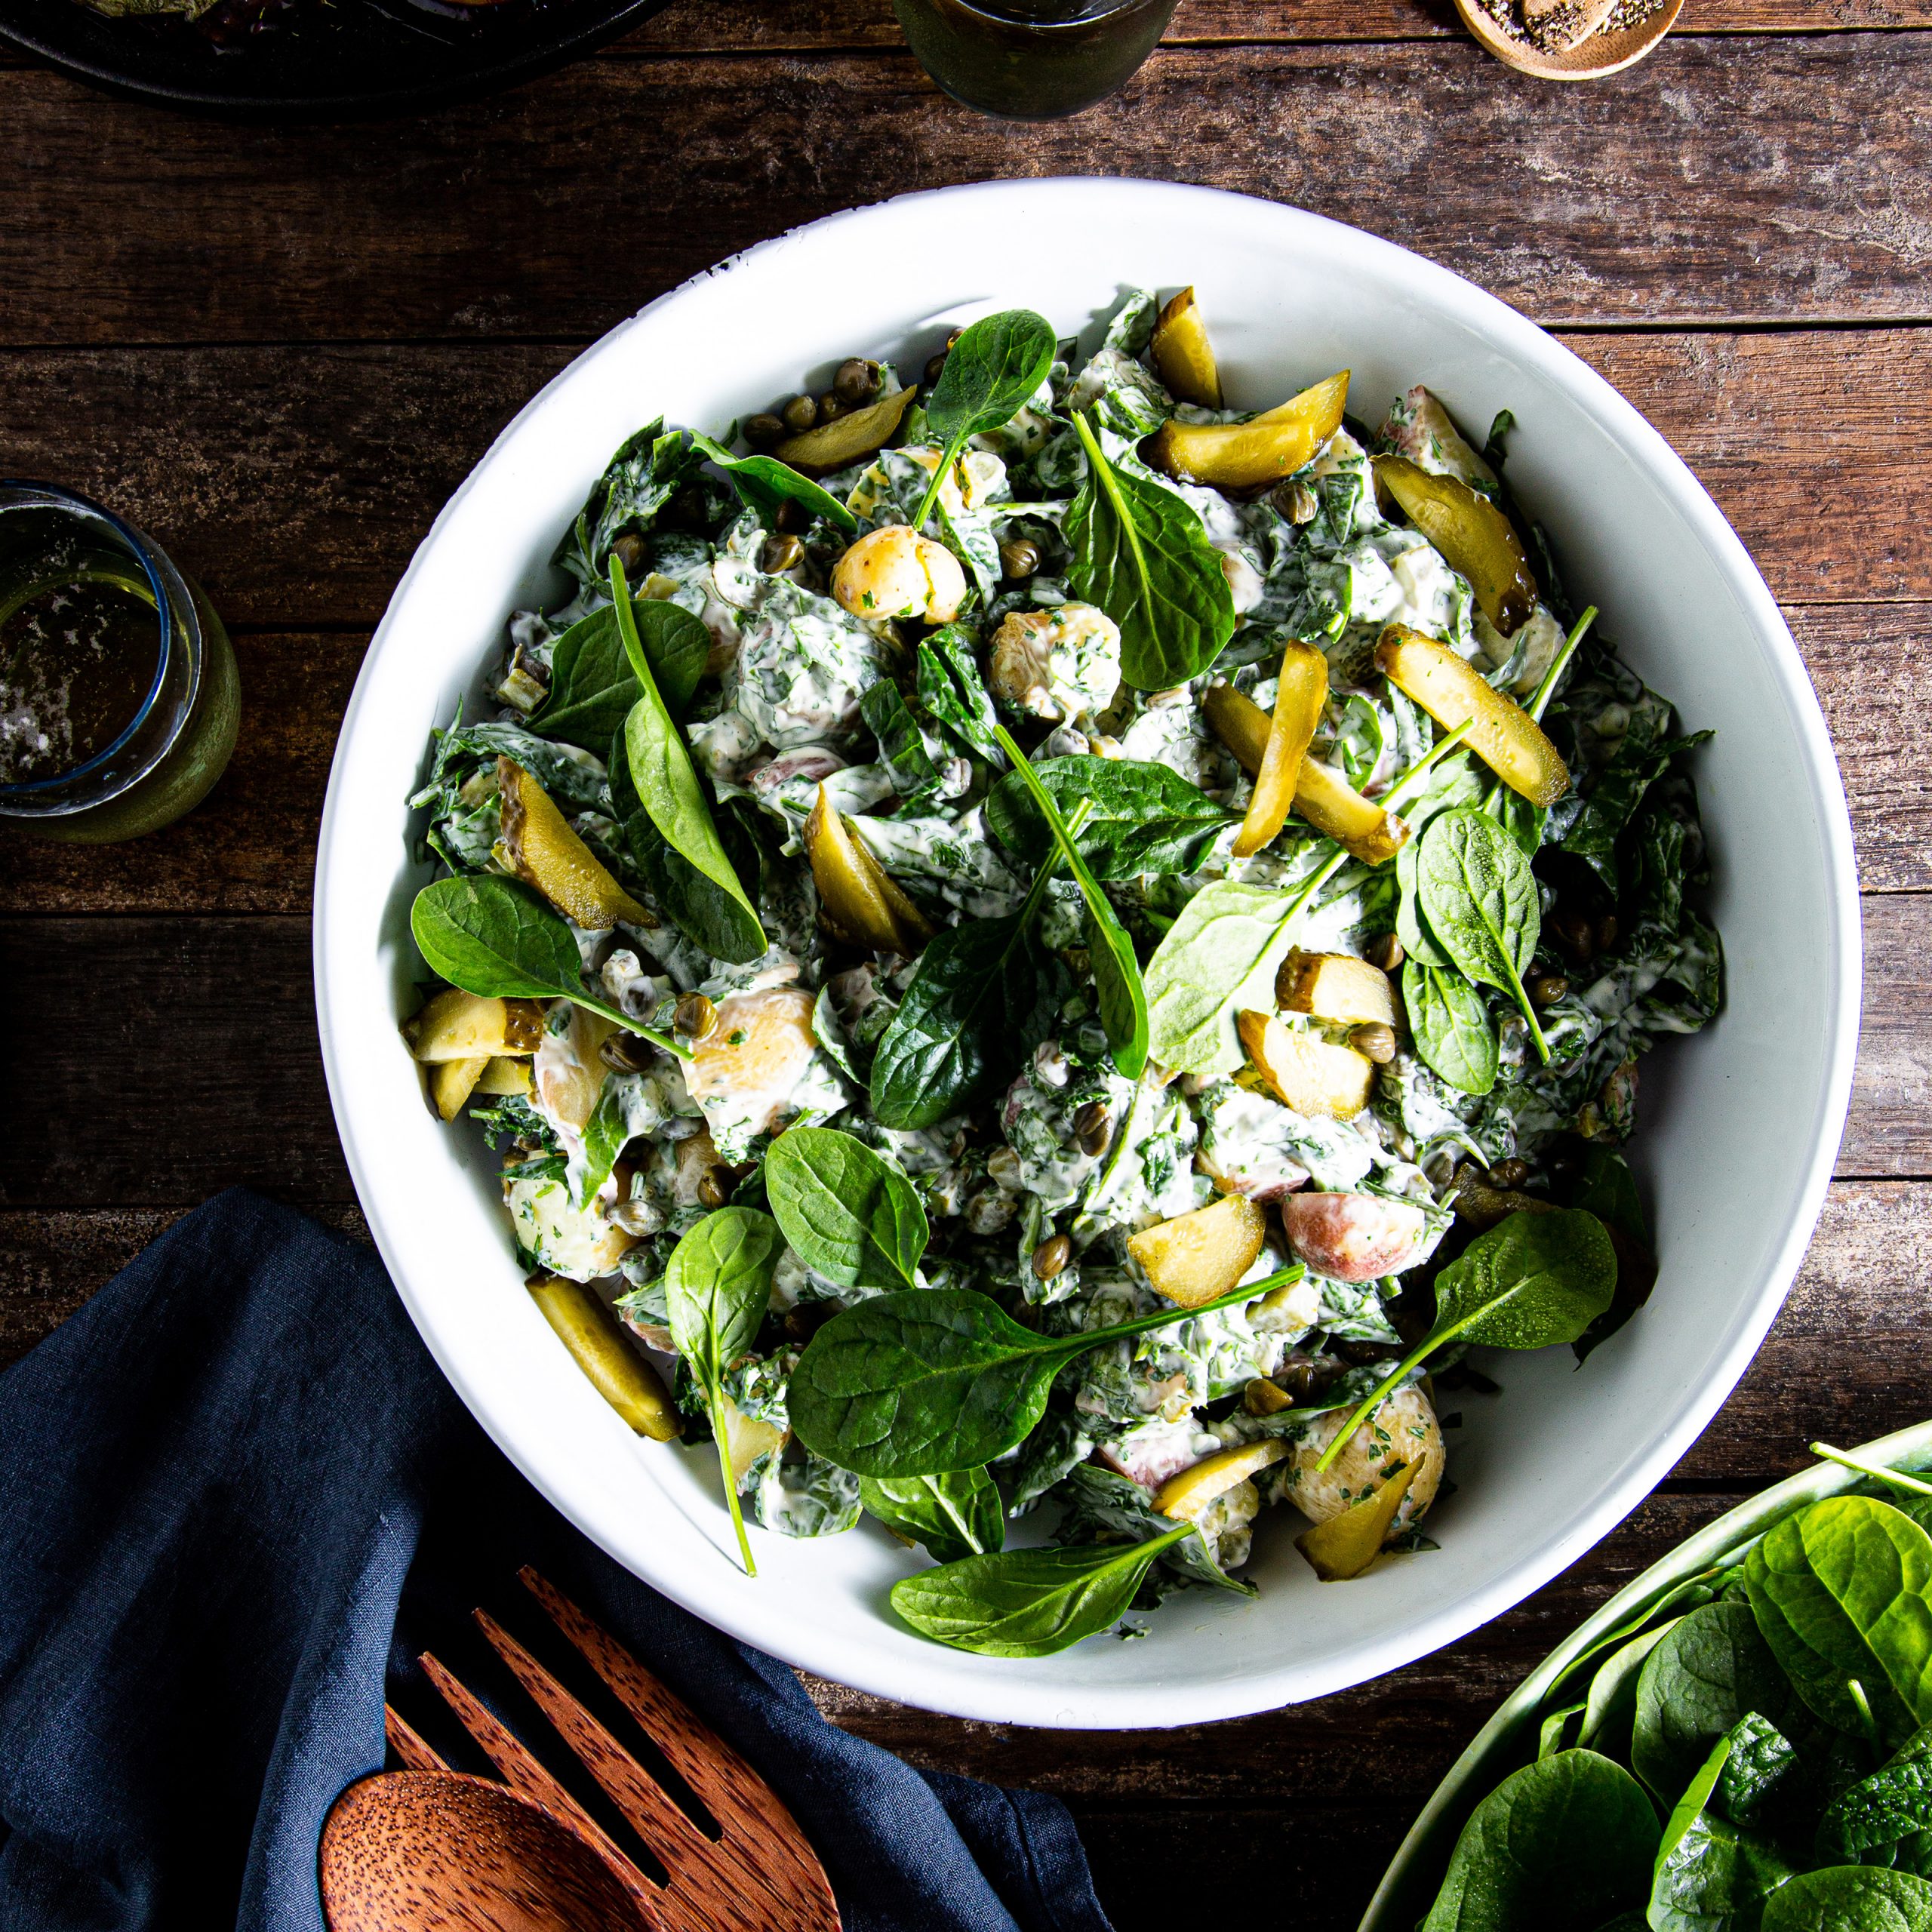 LeaderBrand Spinach and Potato Salad